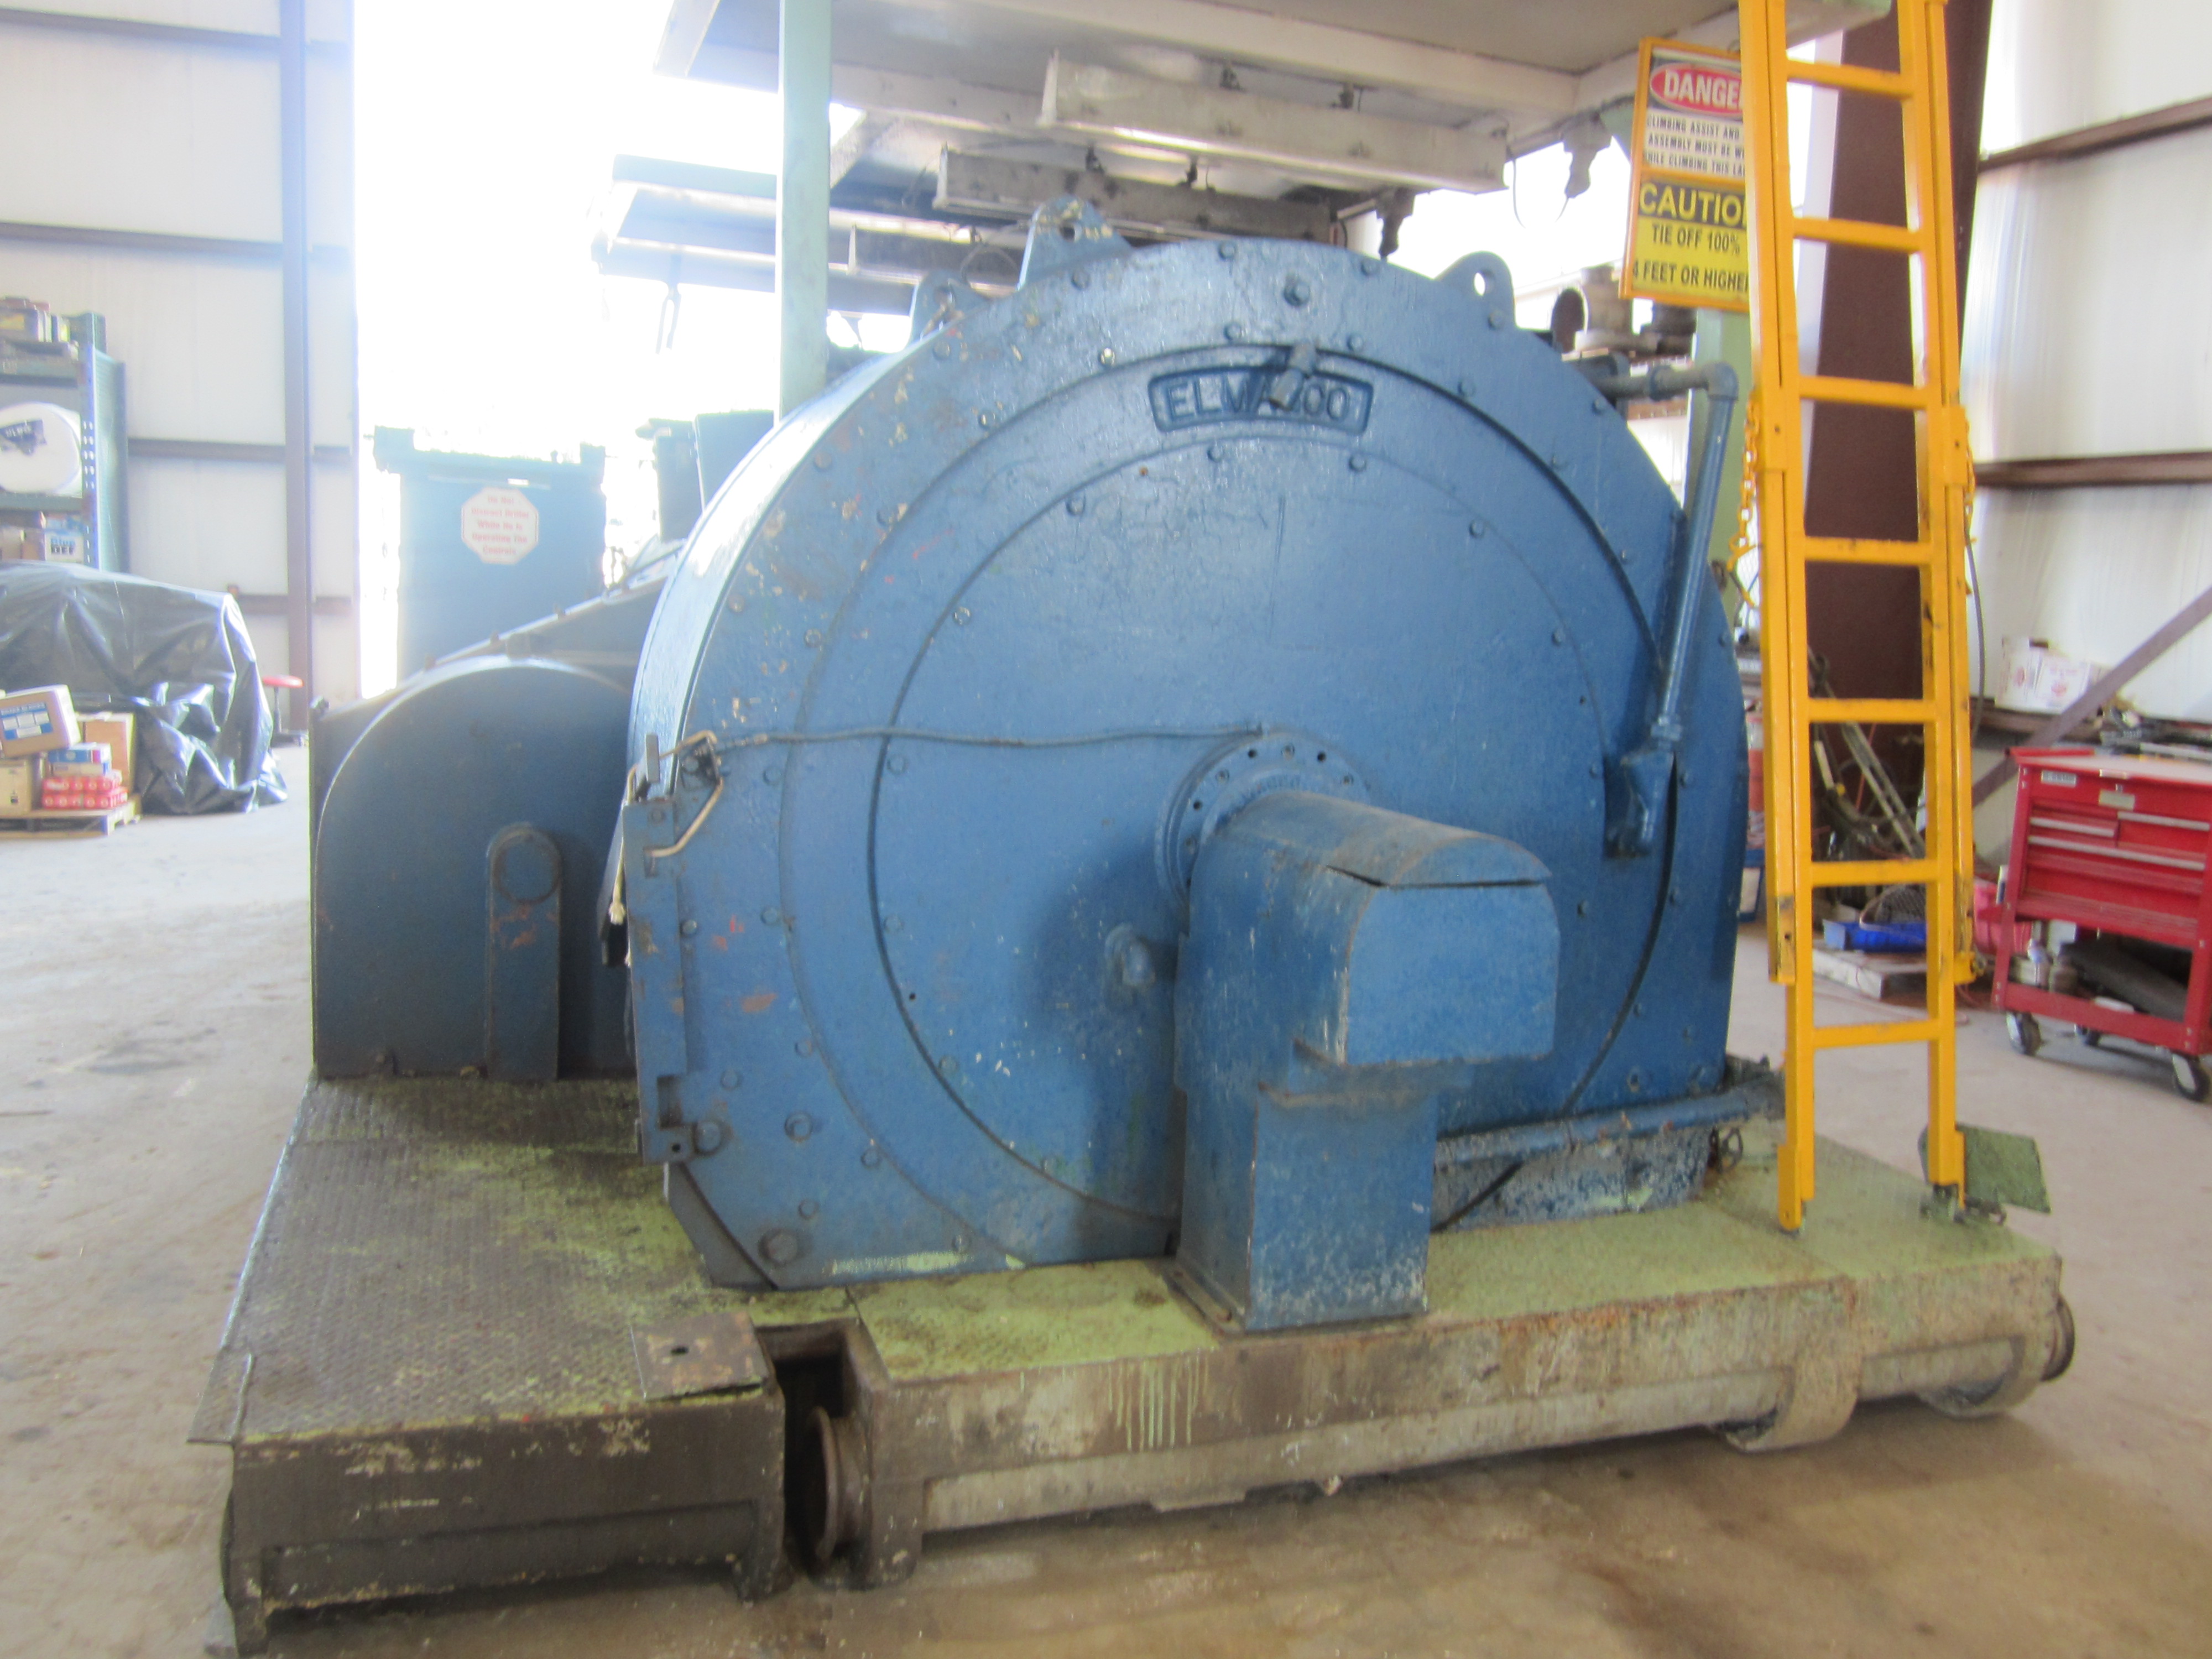 Drilling Equipment - Electric Brakes